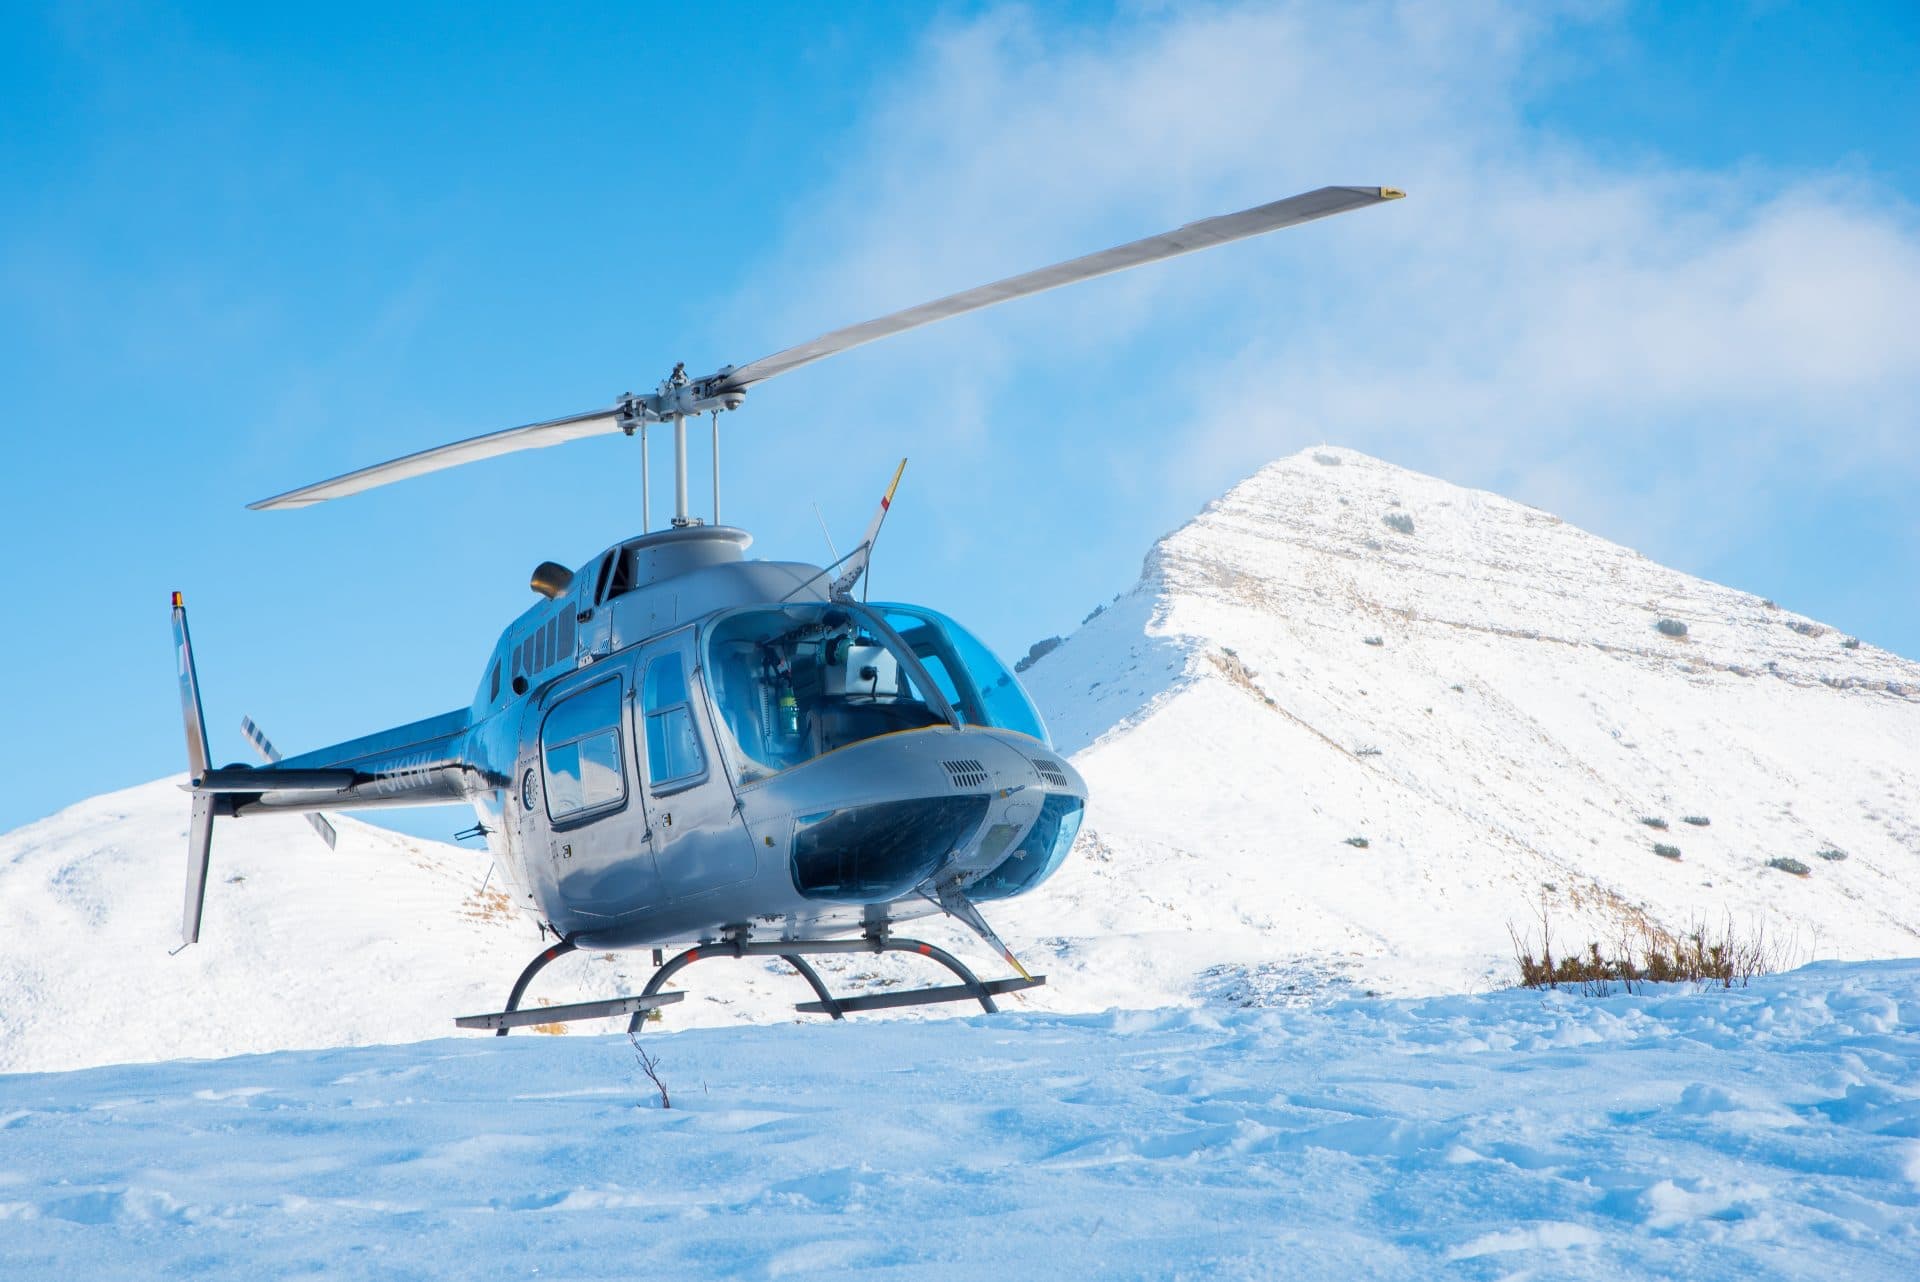 Helicopter rescue cover insurance